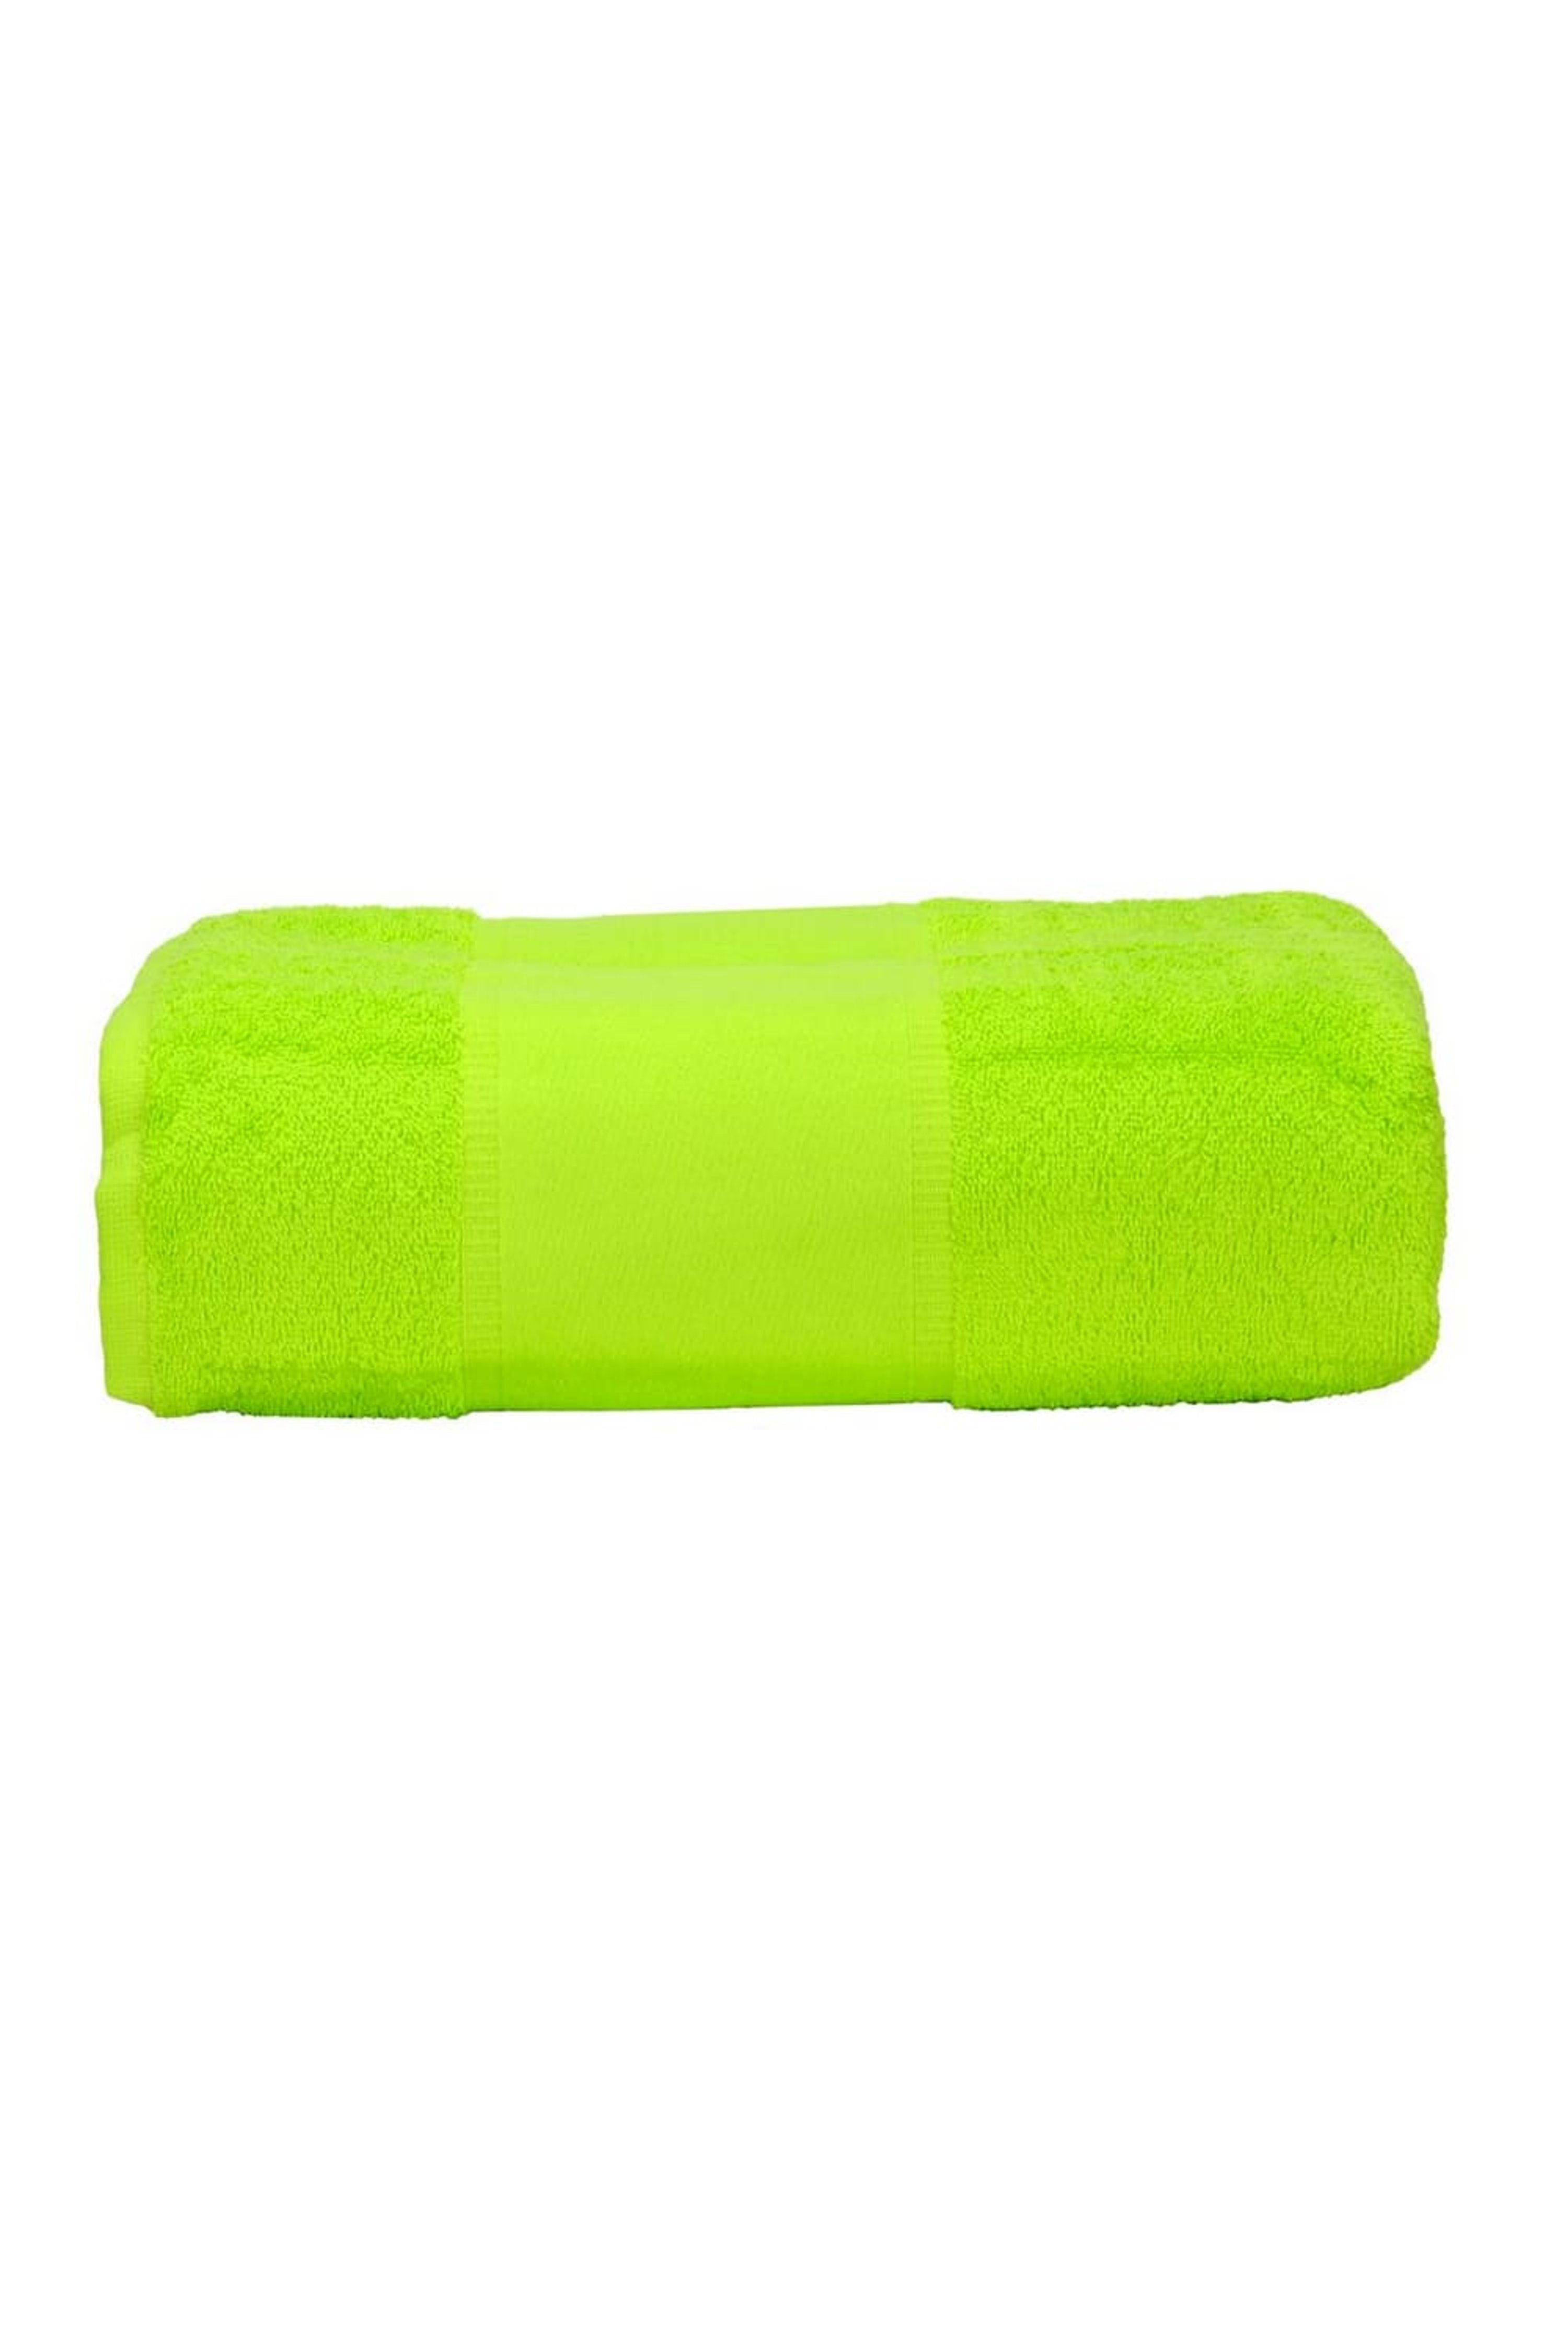 A&R TOWELS A&R TOWELS A&R TOWELS PRINT-ME BIG TOWEL (LIME GREEN) (ONE SIZE)